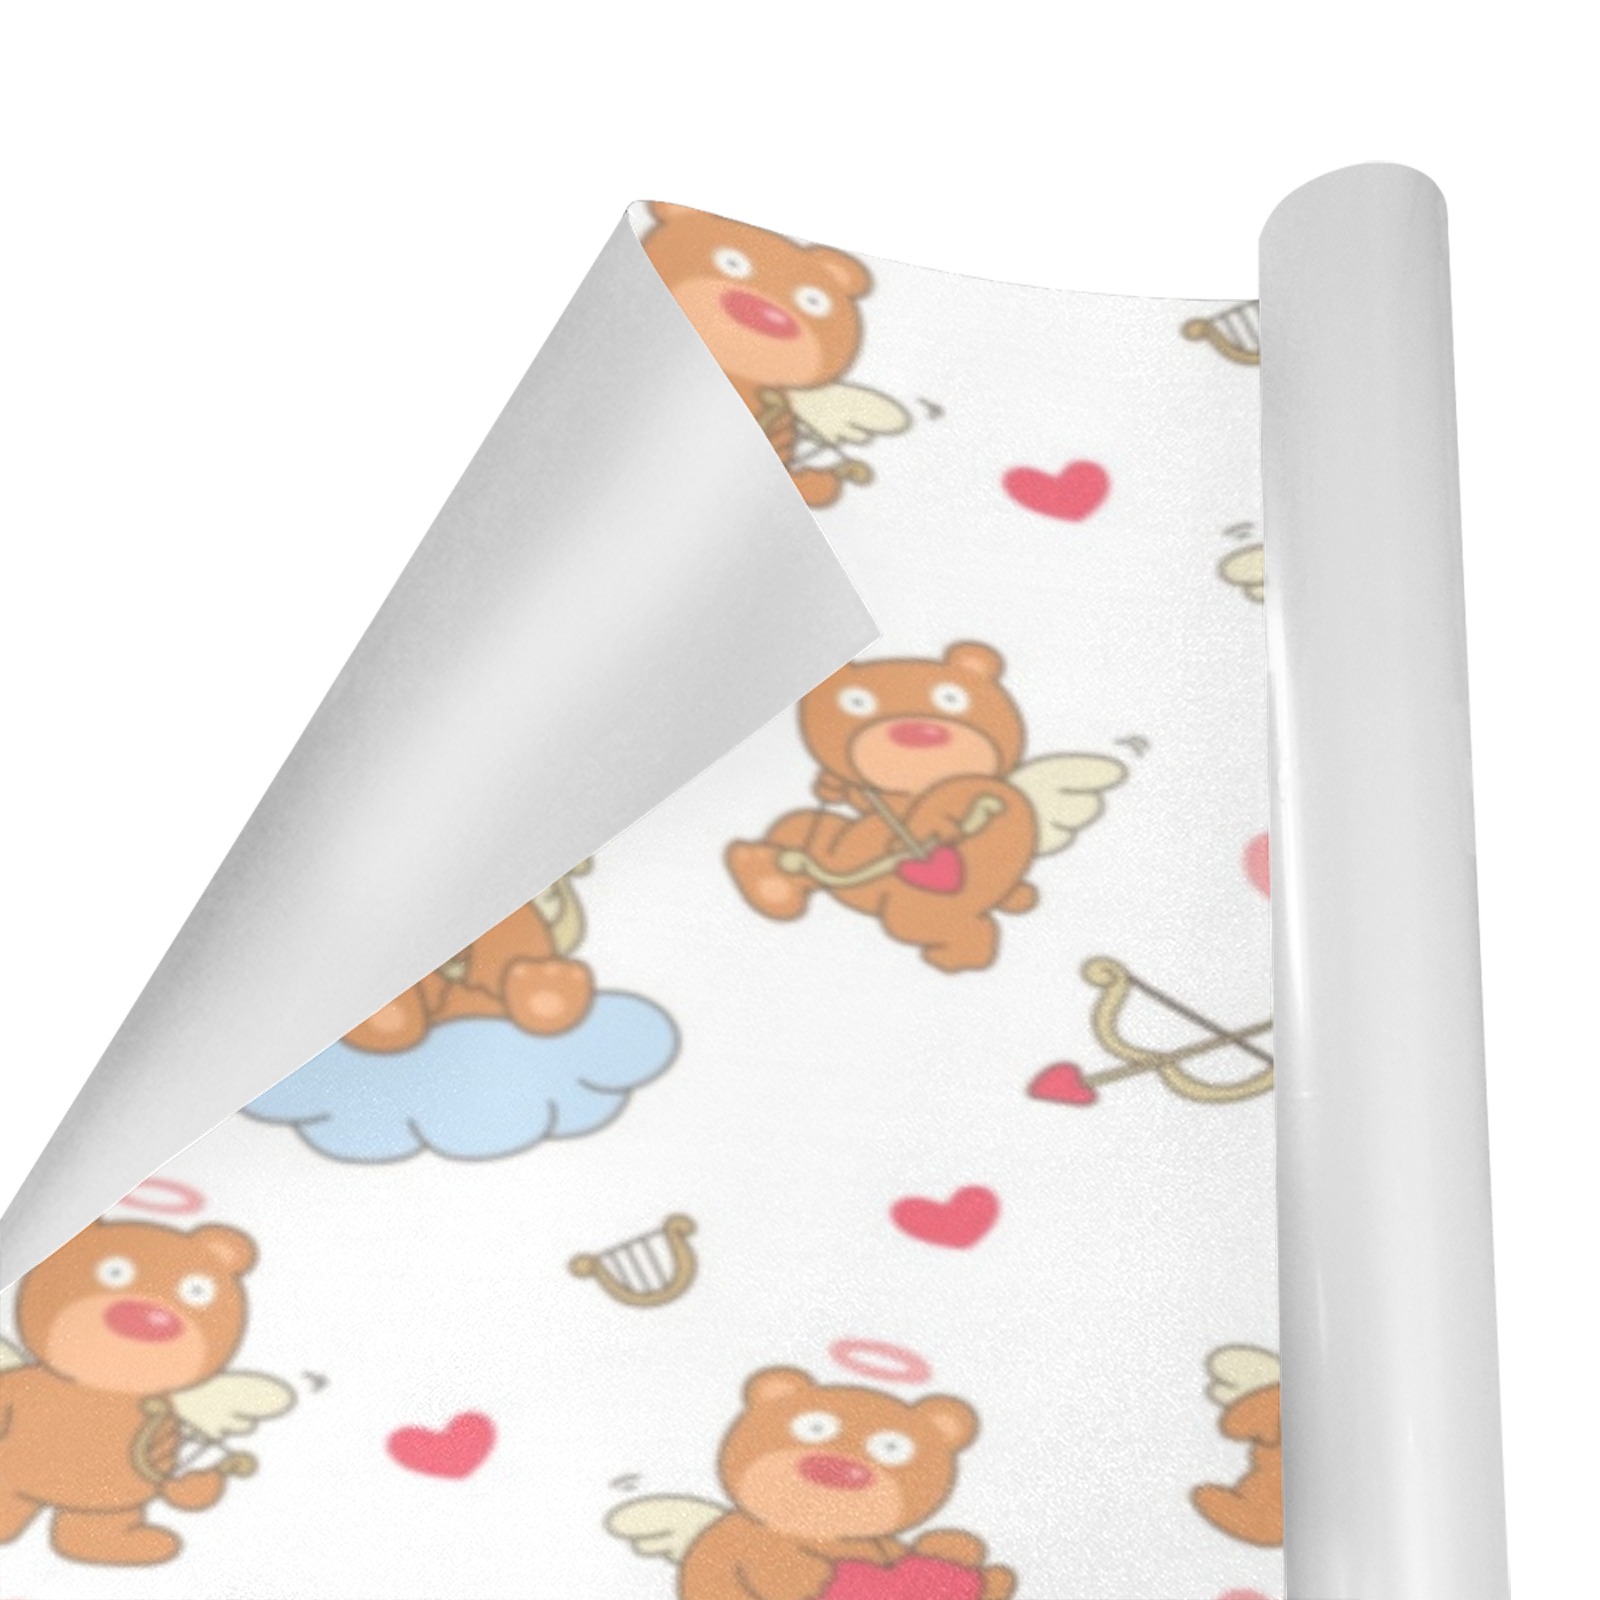 Cupid Brown Bear Pattern Gift Wrapping Paper 58"x 23" (1 Roll)